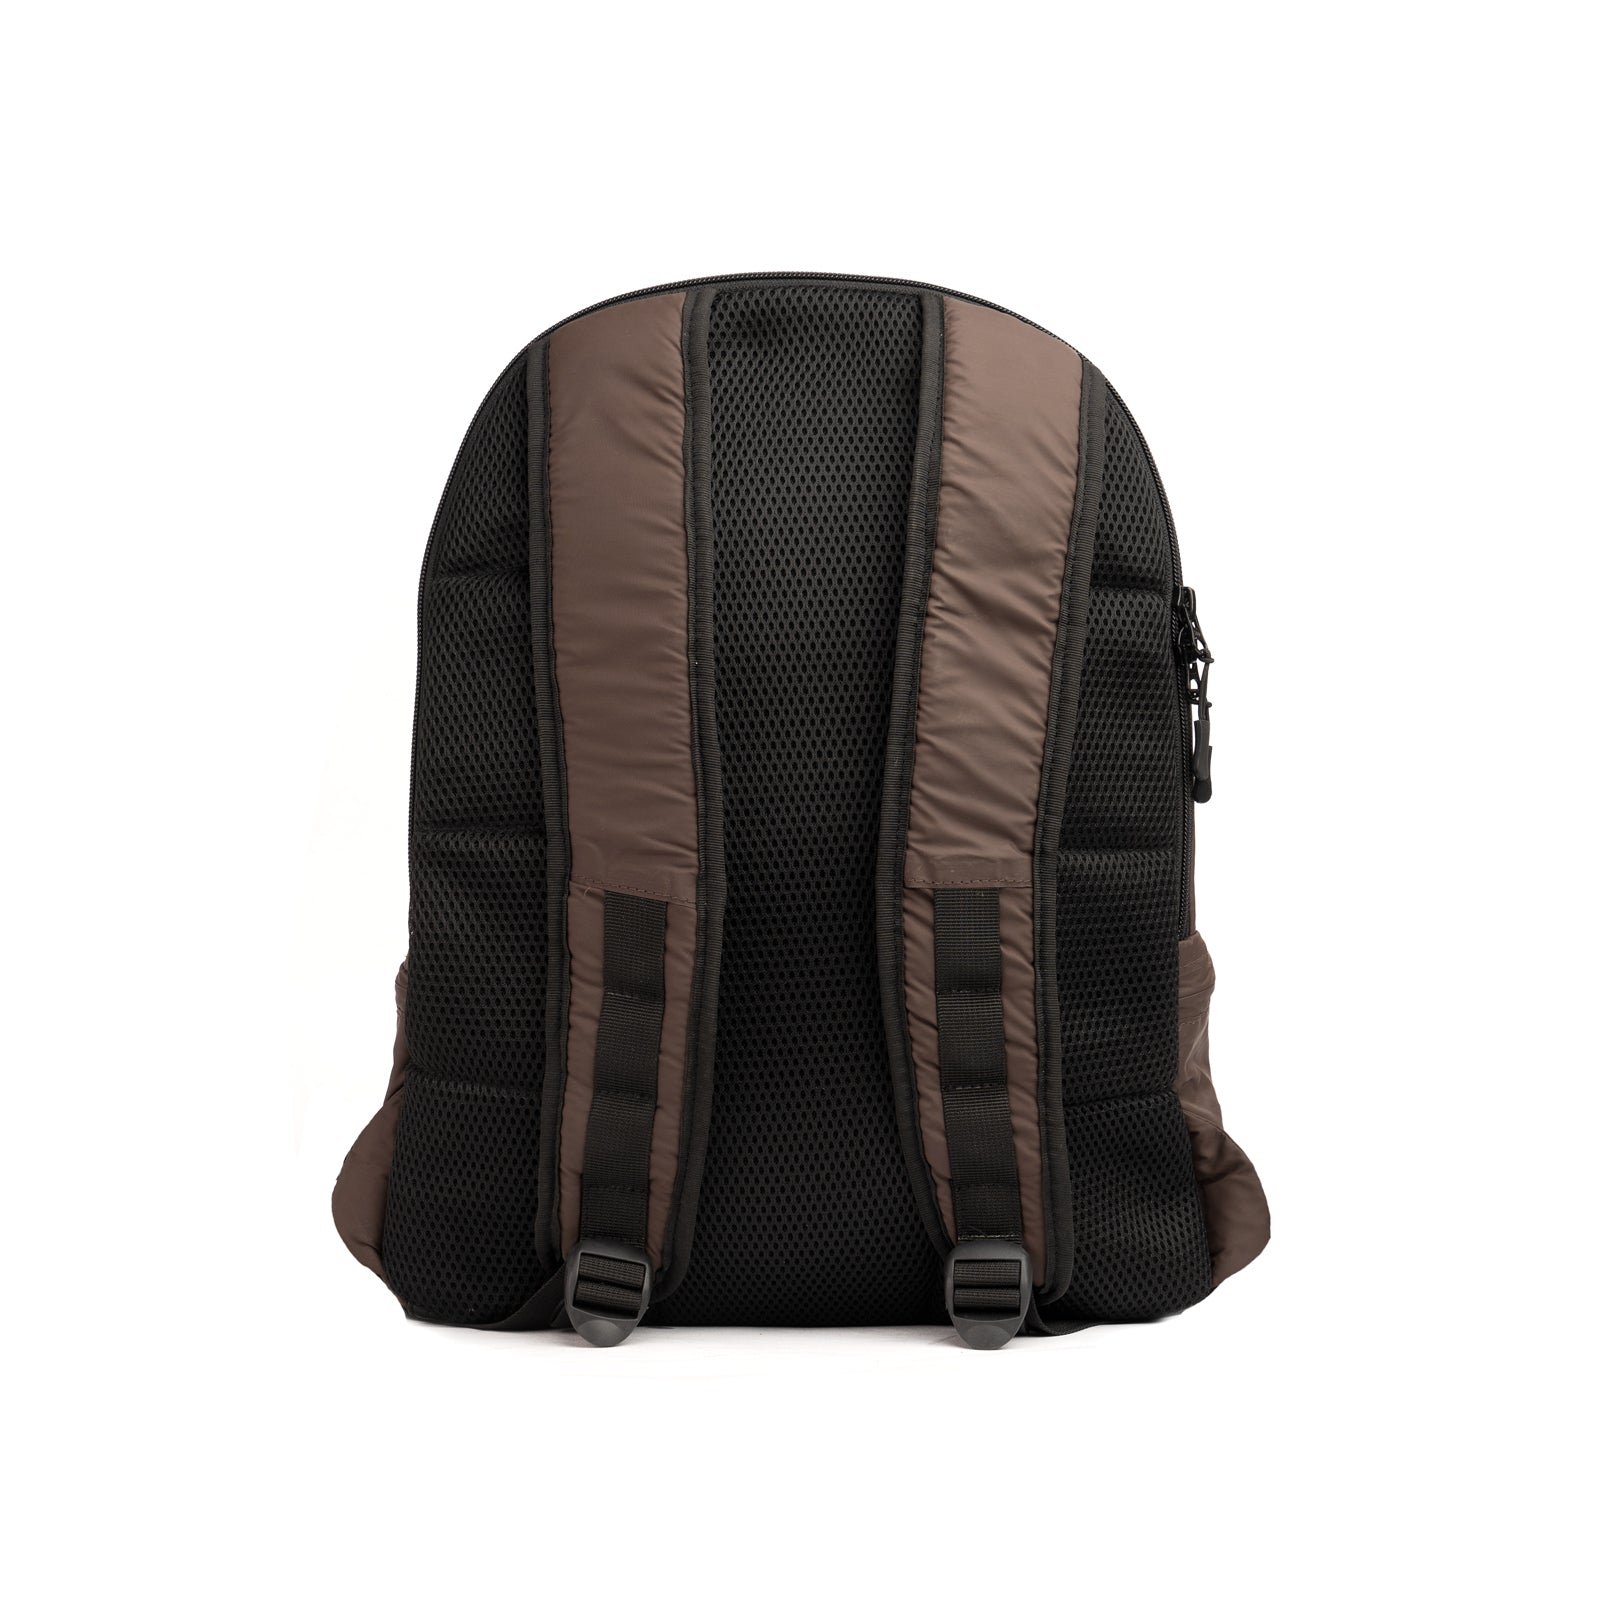 Brown Day Pack